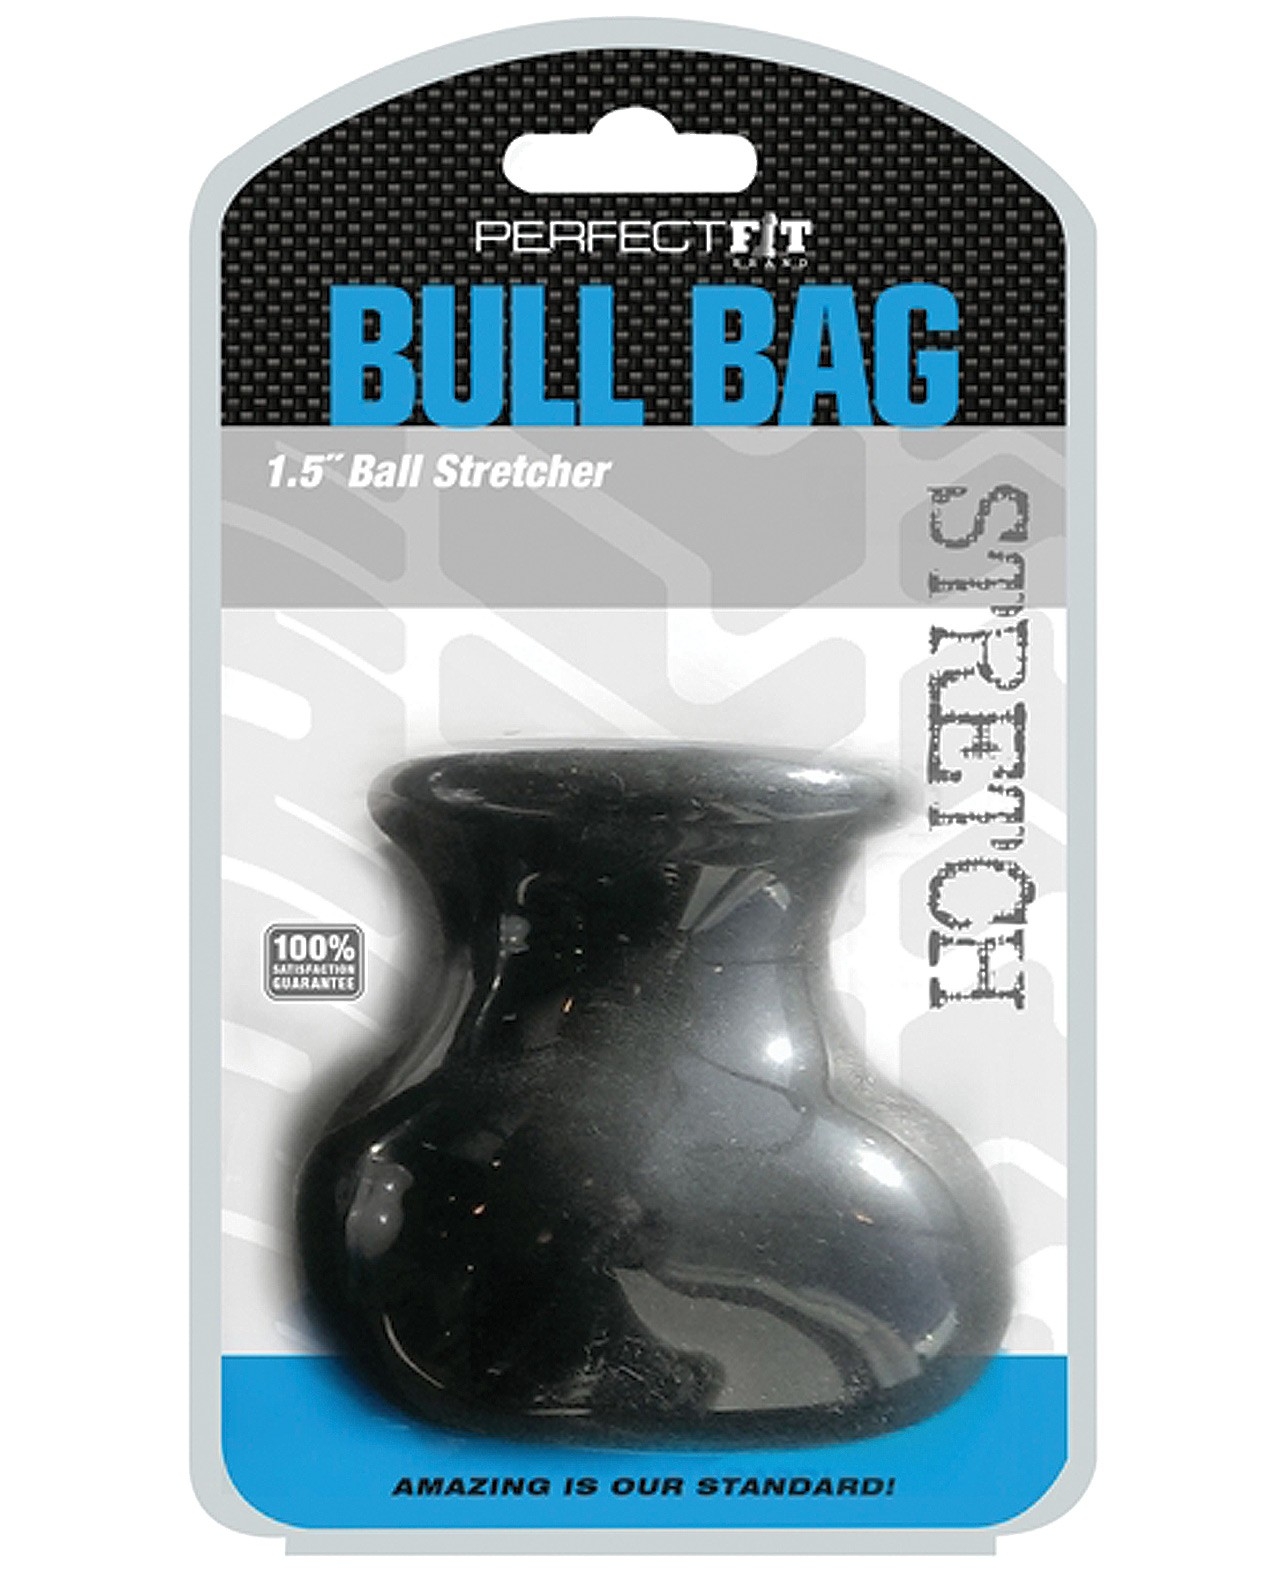 Perfect Fit Bull Bag 1.5 Ball Stretcher - Bl  by Perfect fit